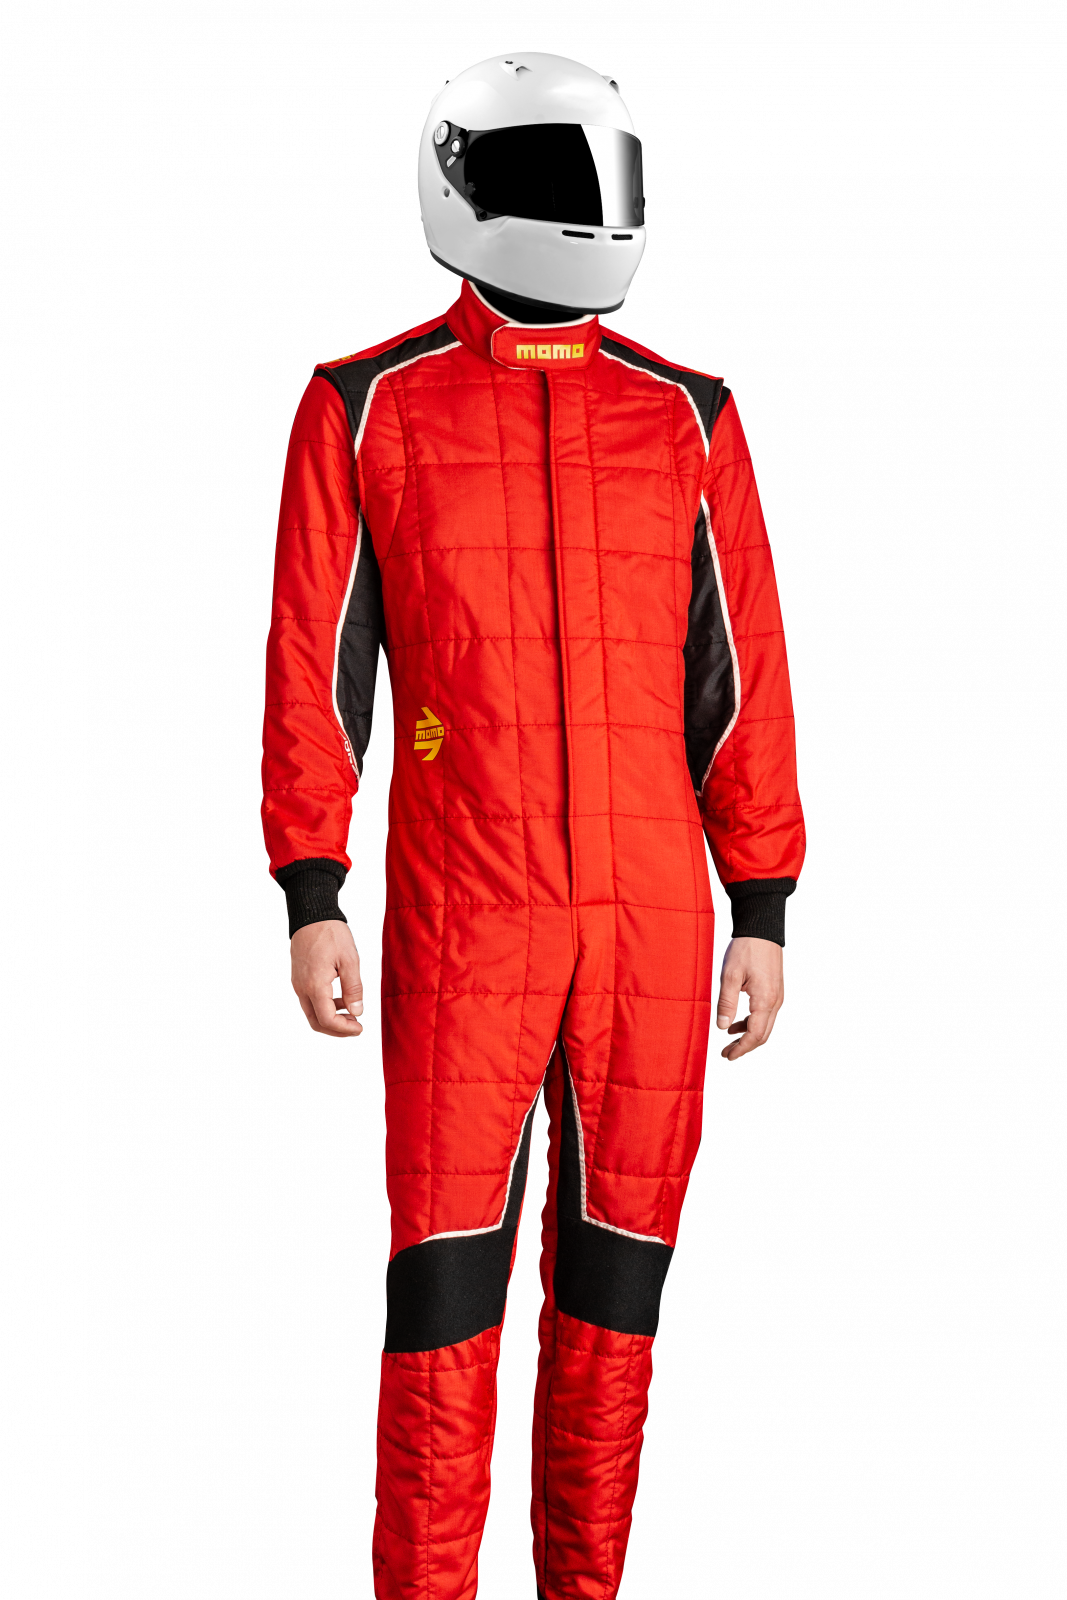 MOMO Corsa Evo Red Size 48 Racing Suit TUCOEVORED48